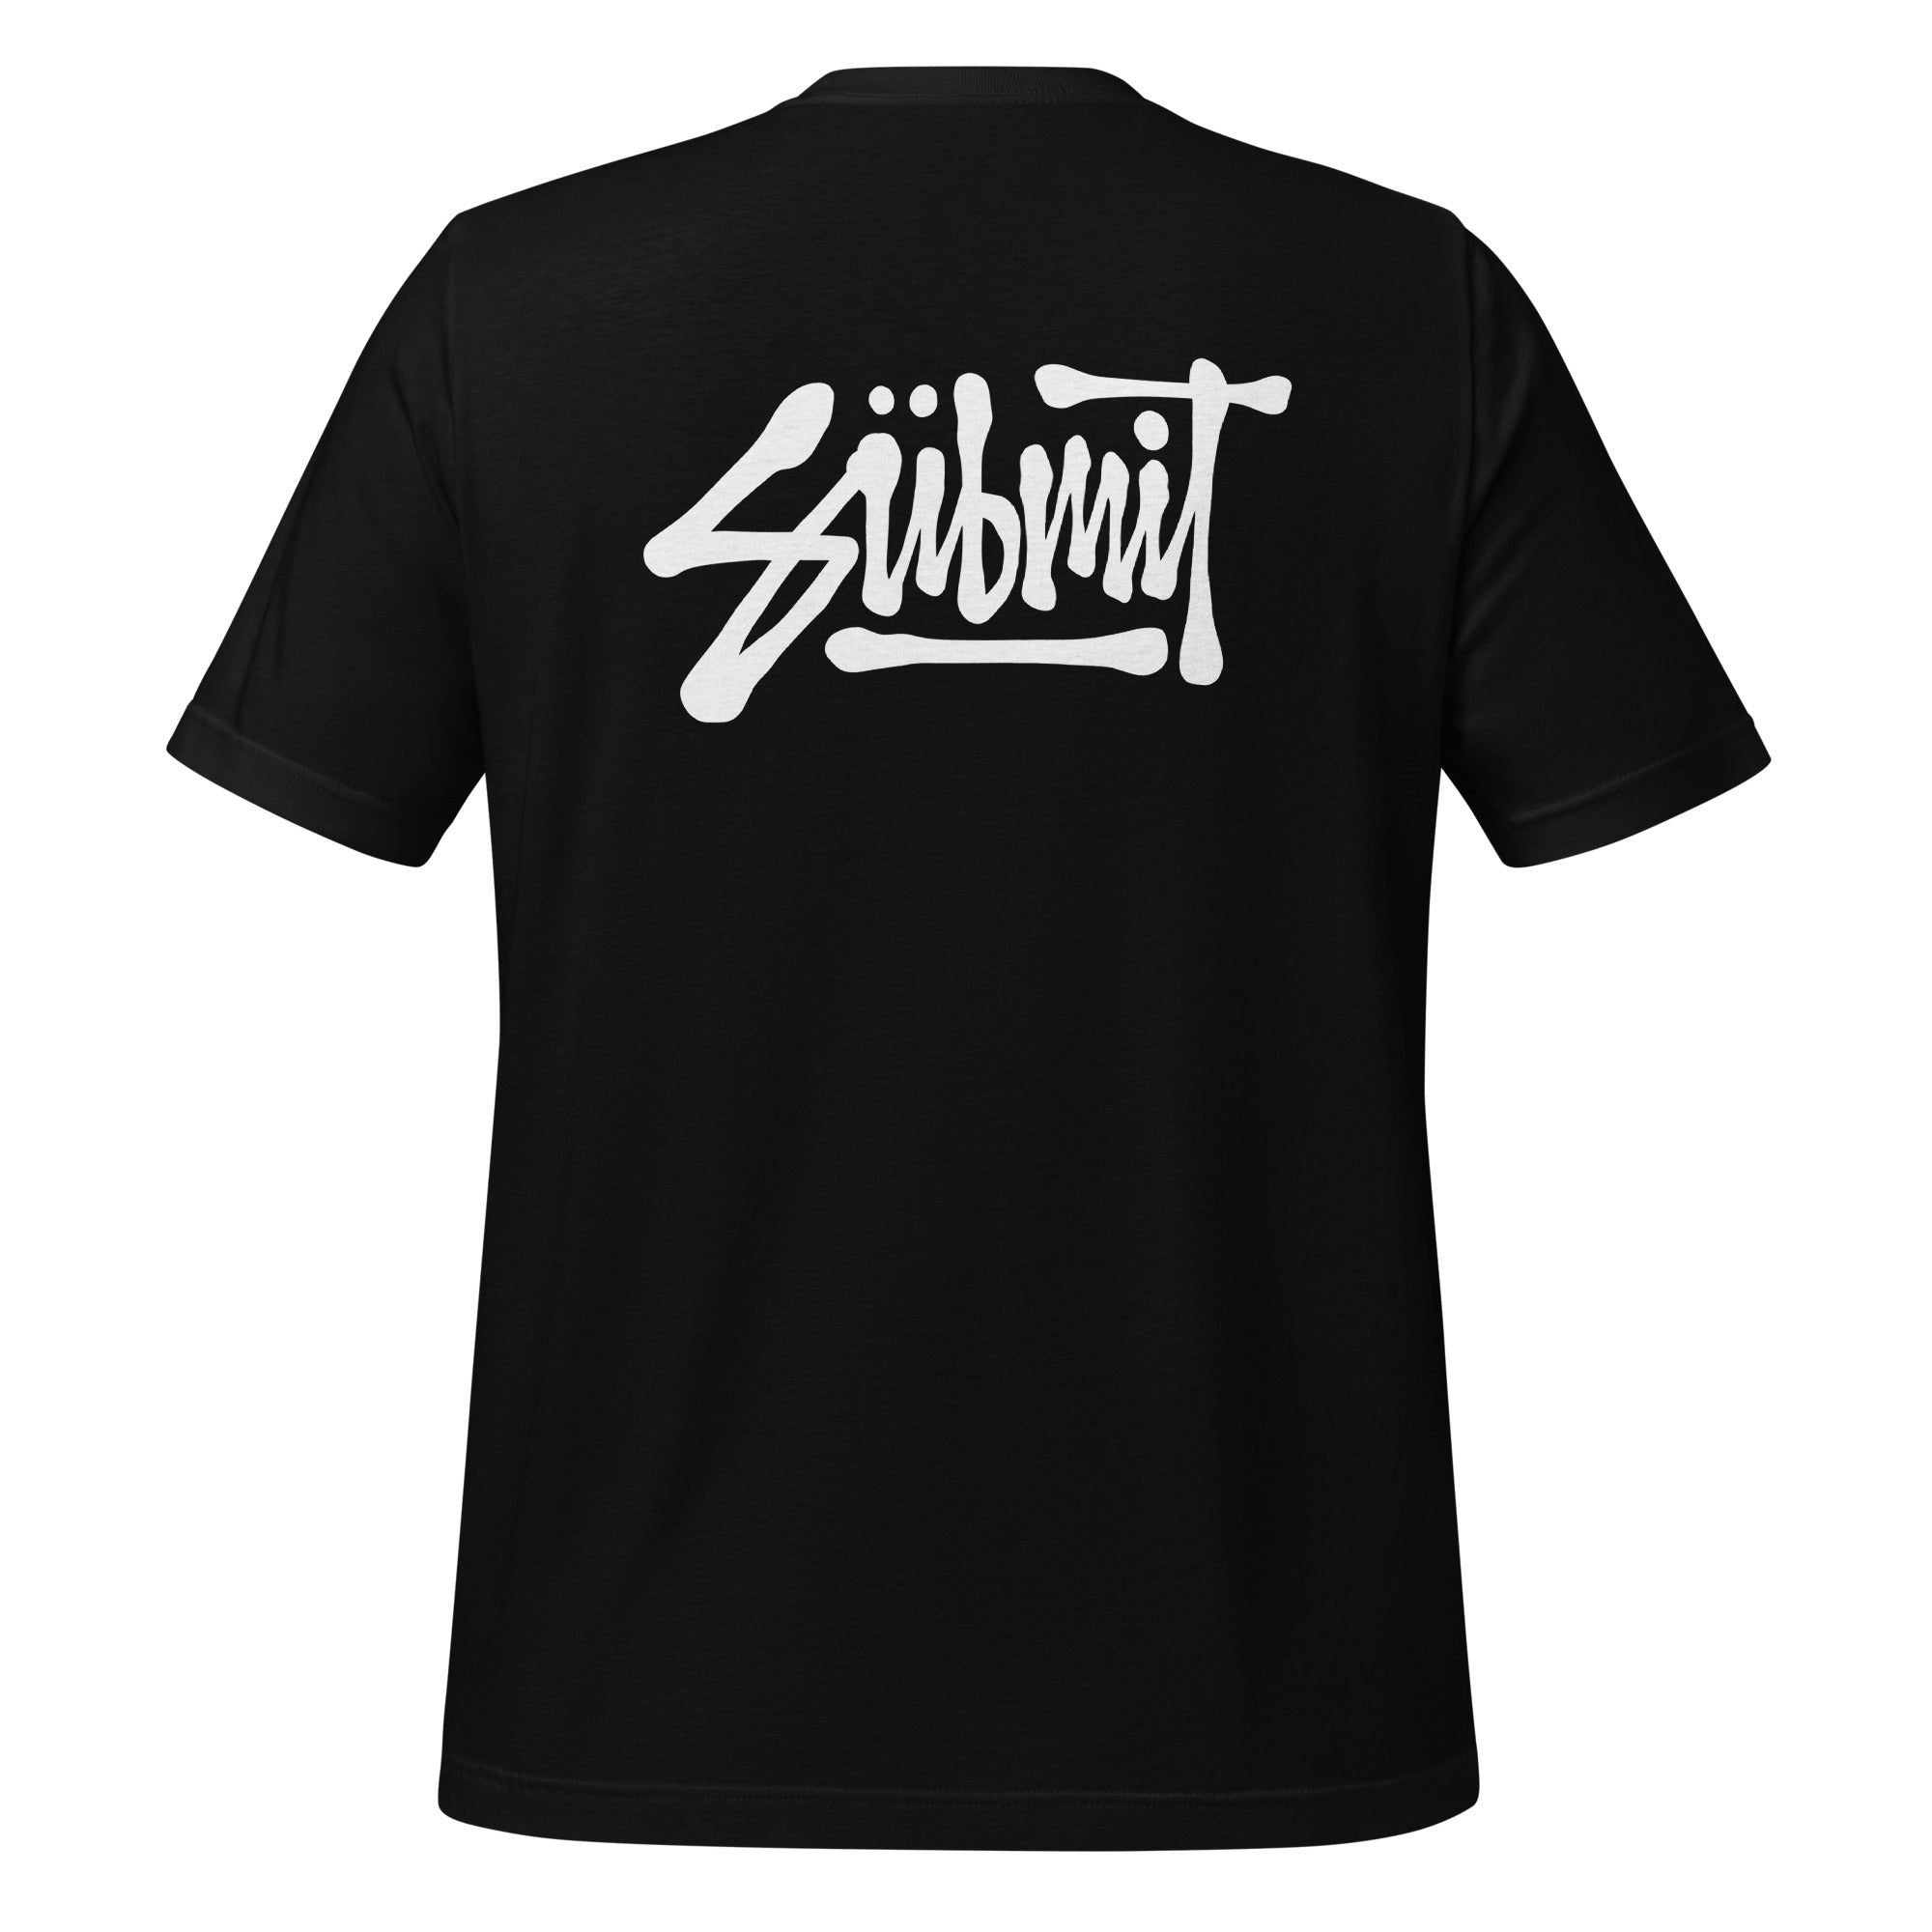 Submit T-Shirt